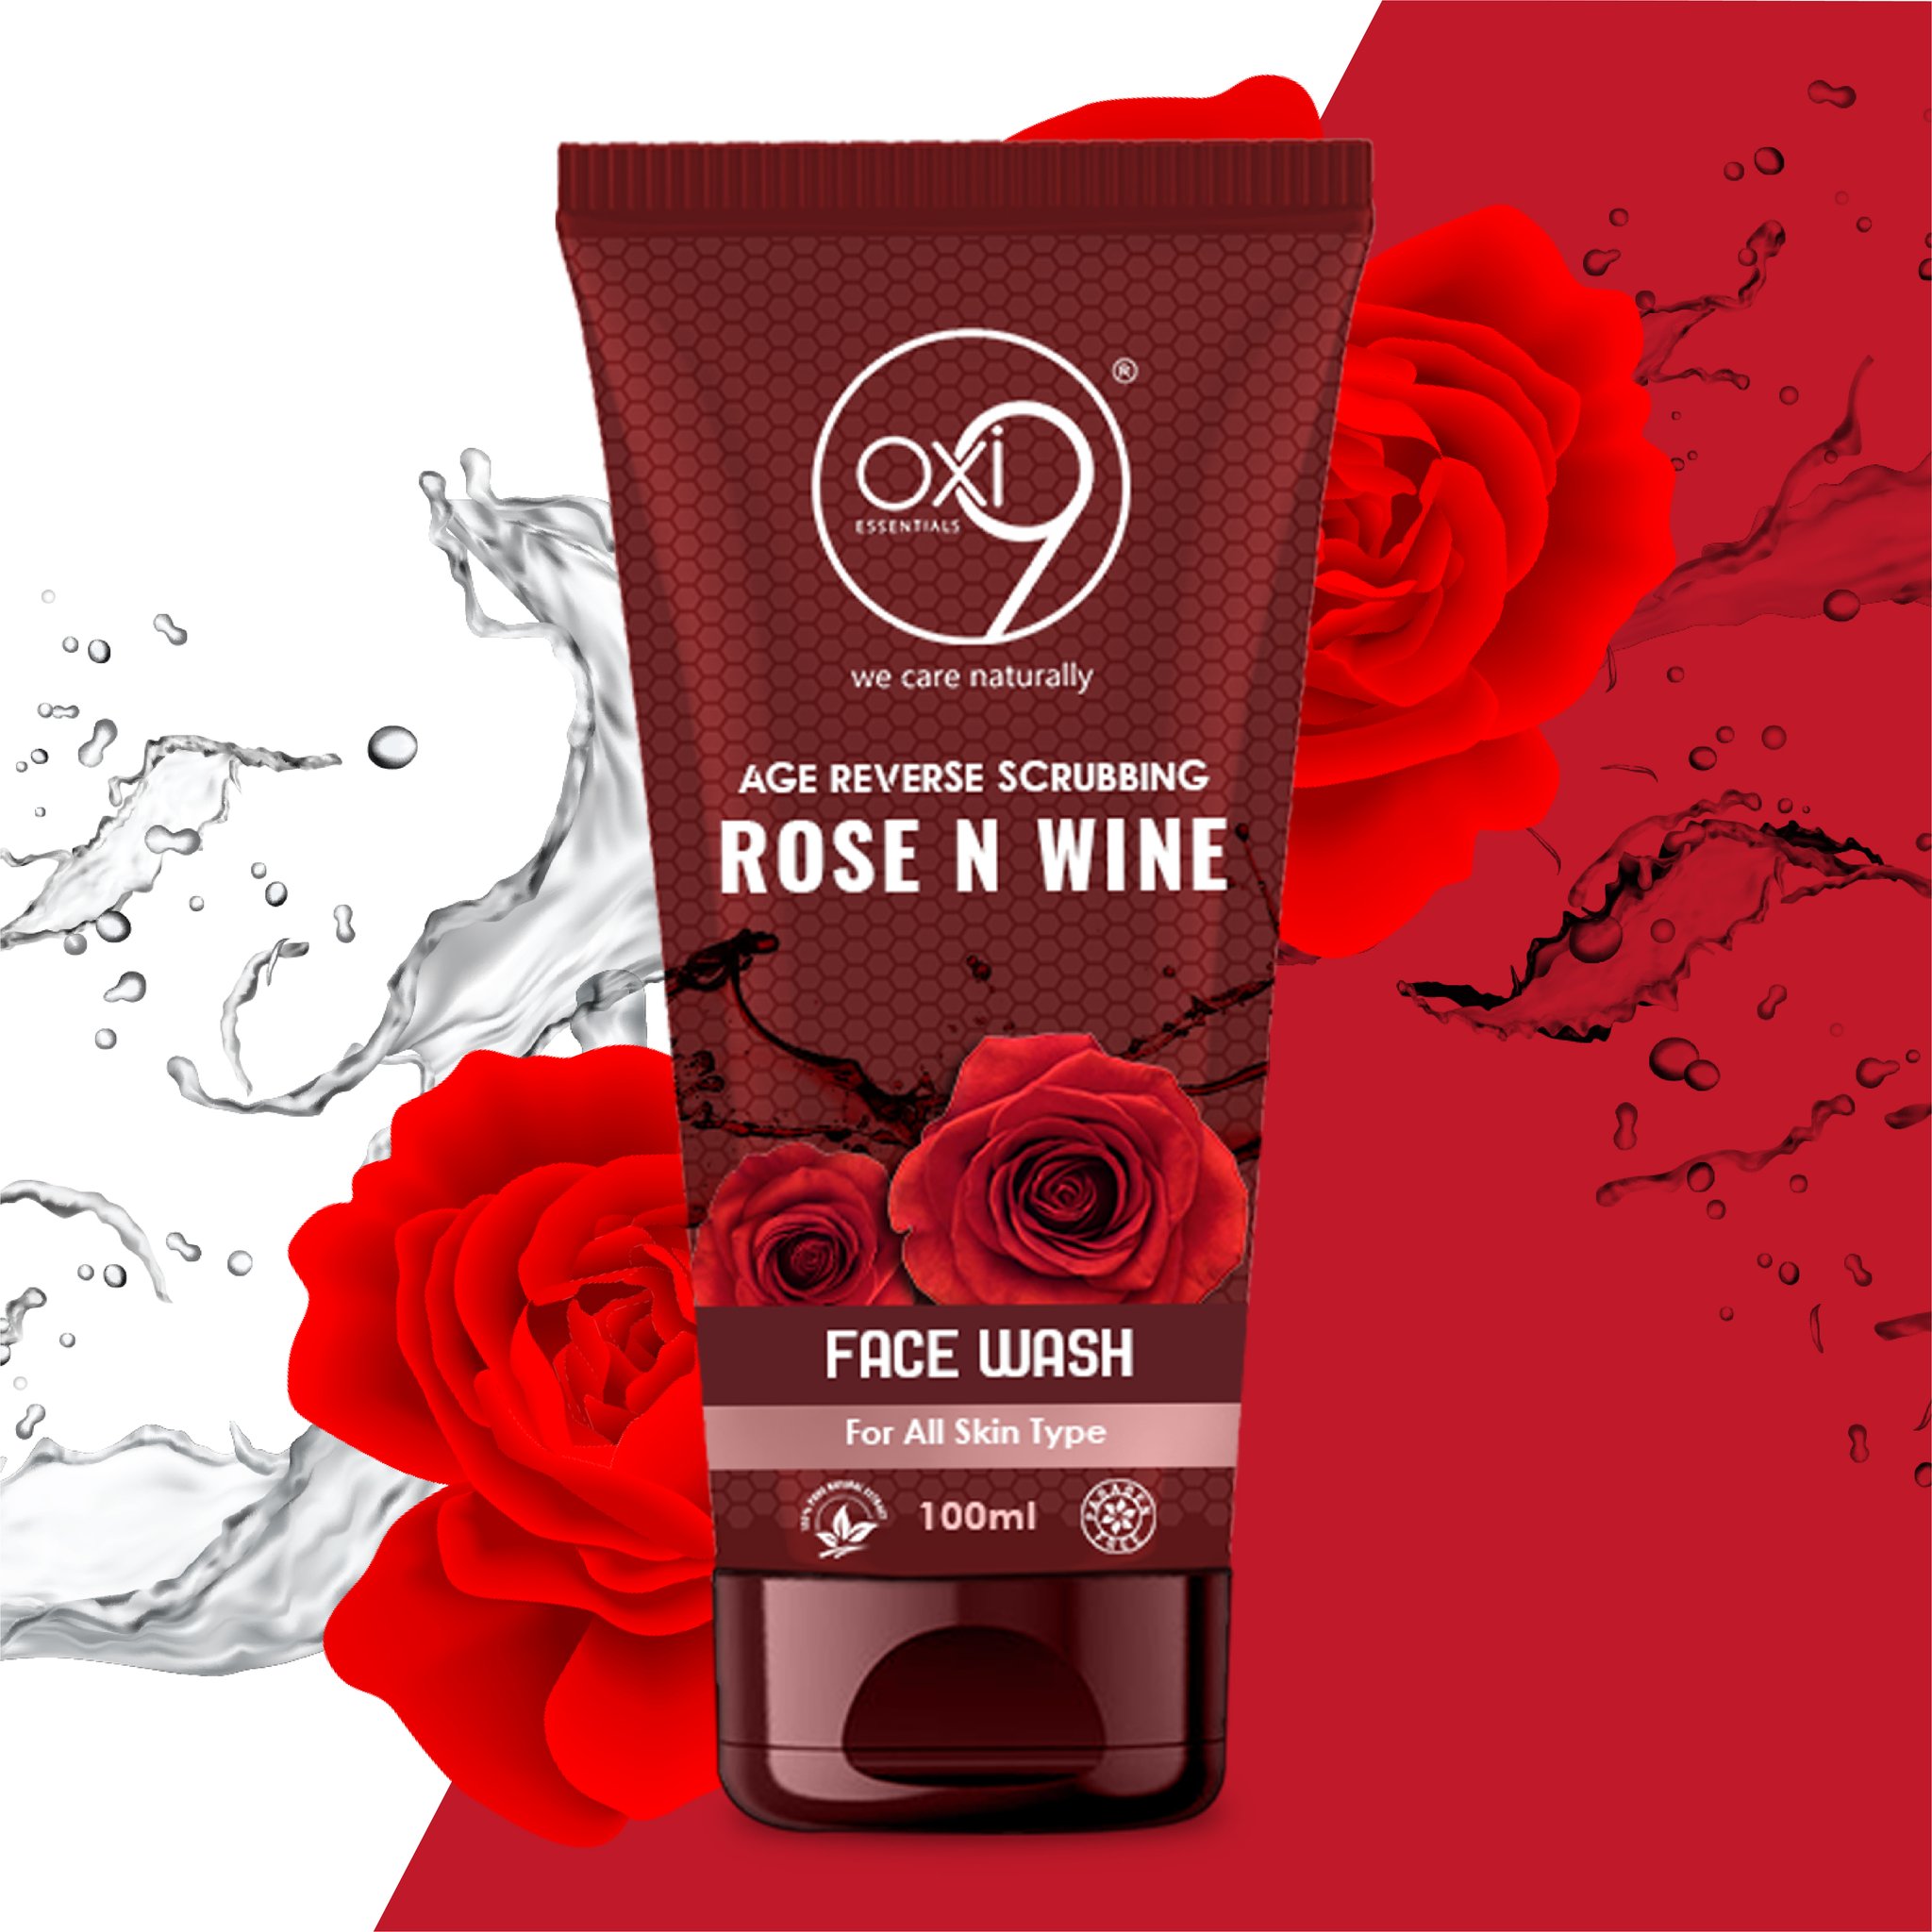 Age Reverse Scrubbing Rose N Wine Face Wash - 100ml | Paraben & Sulphate Free